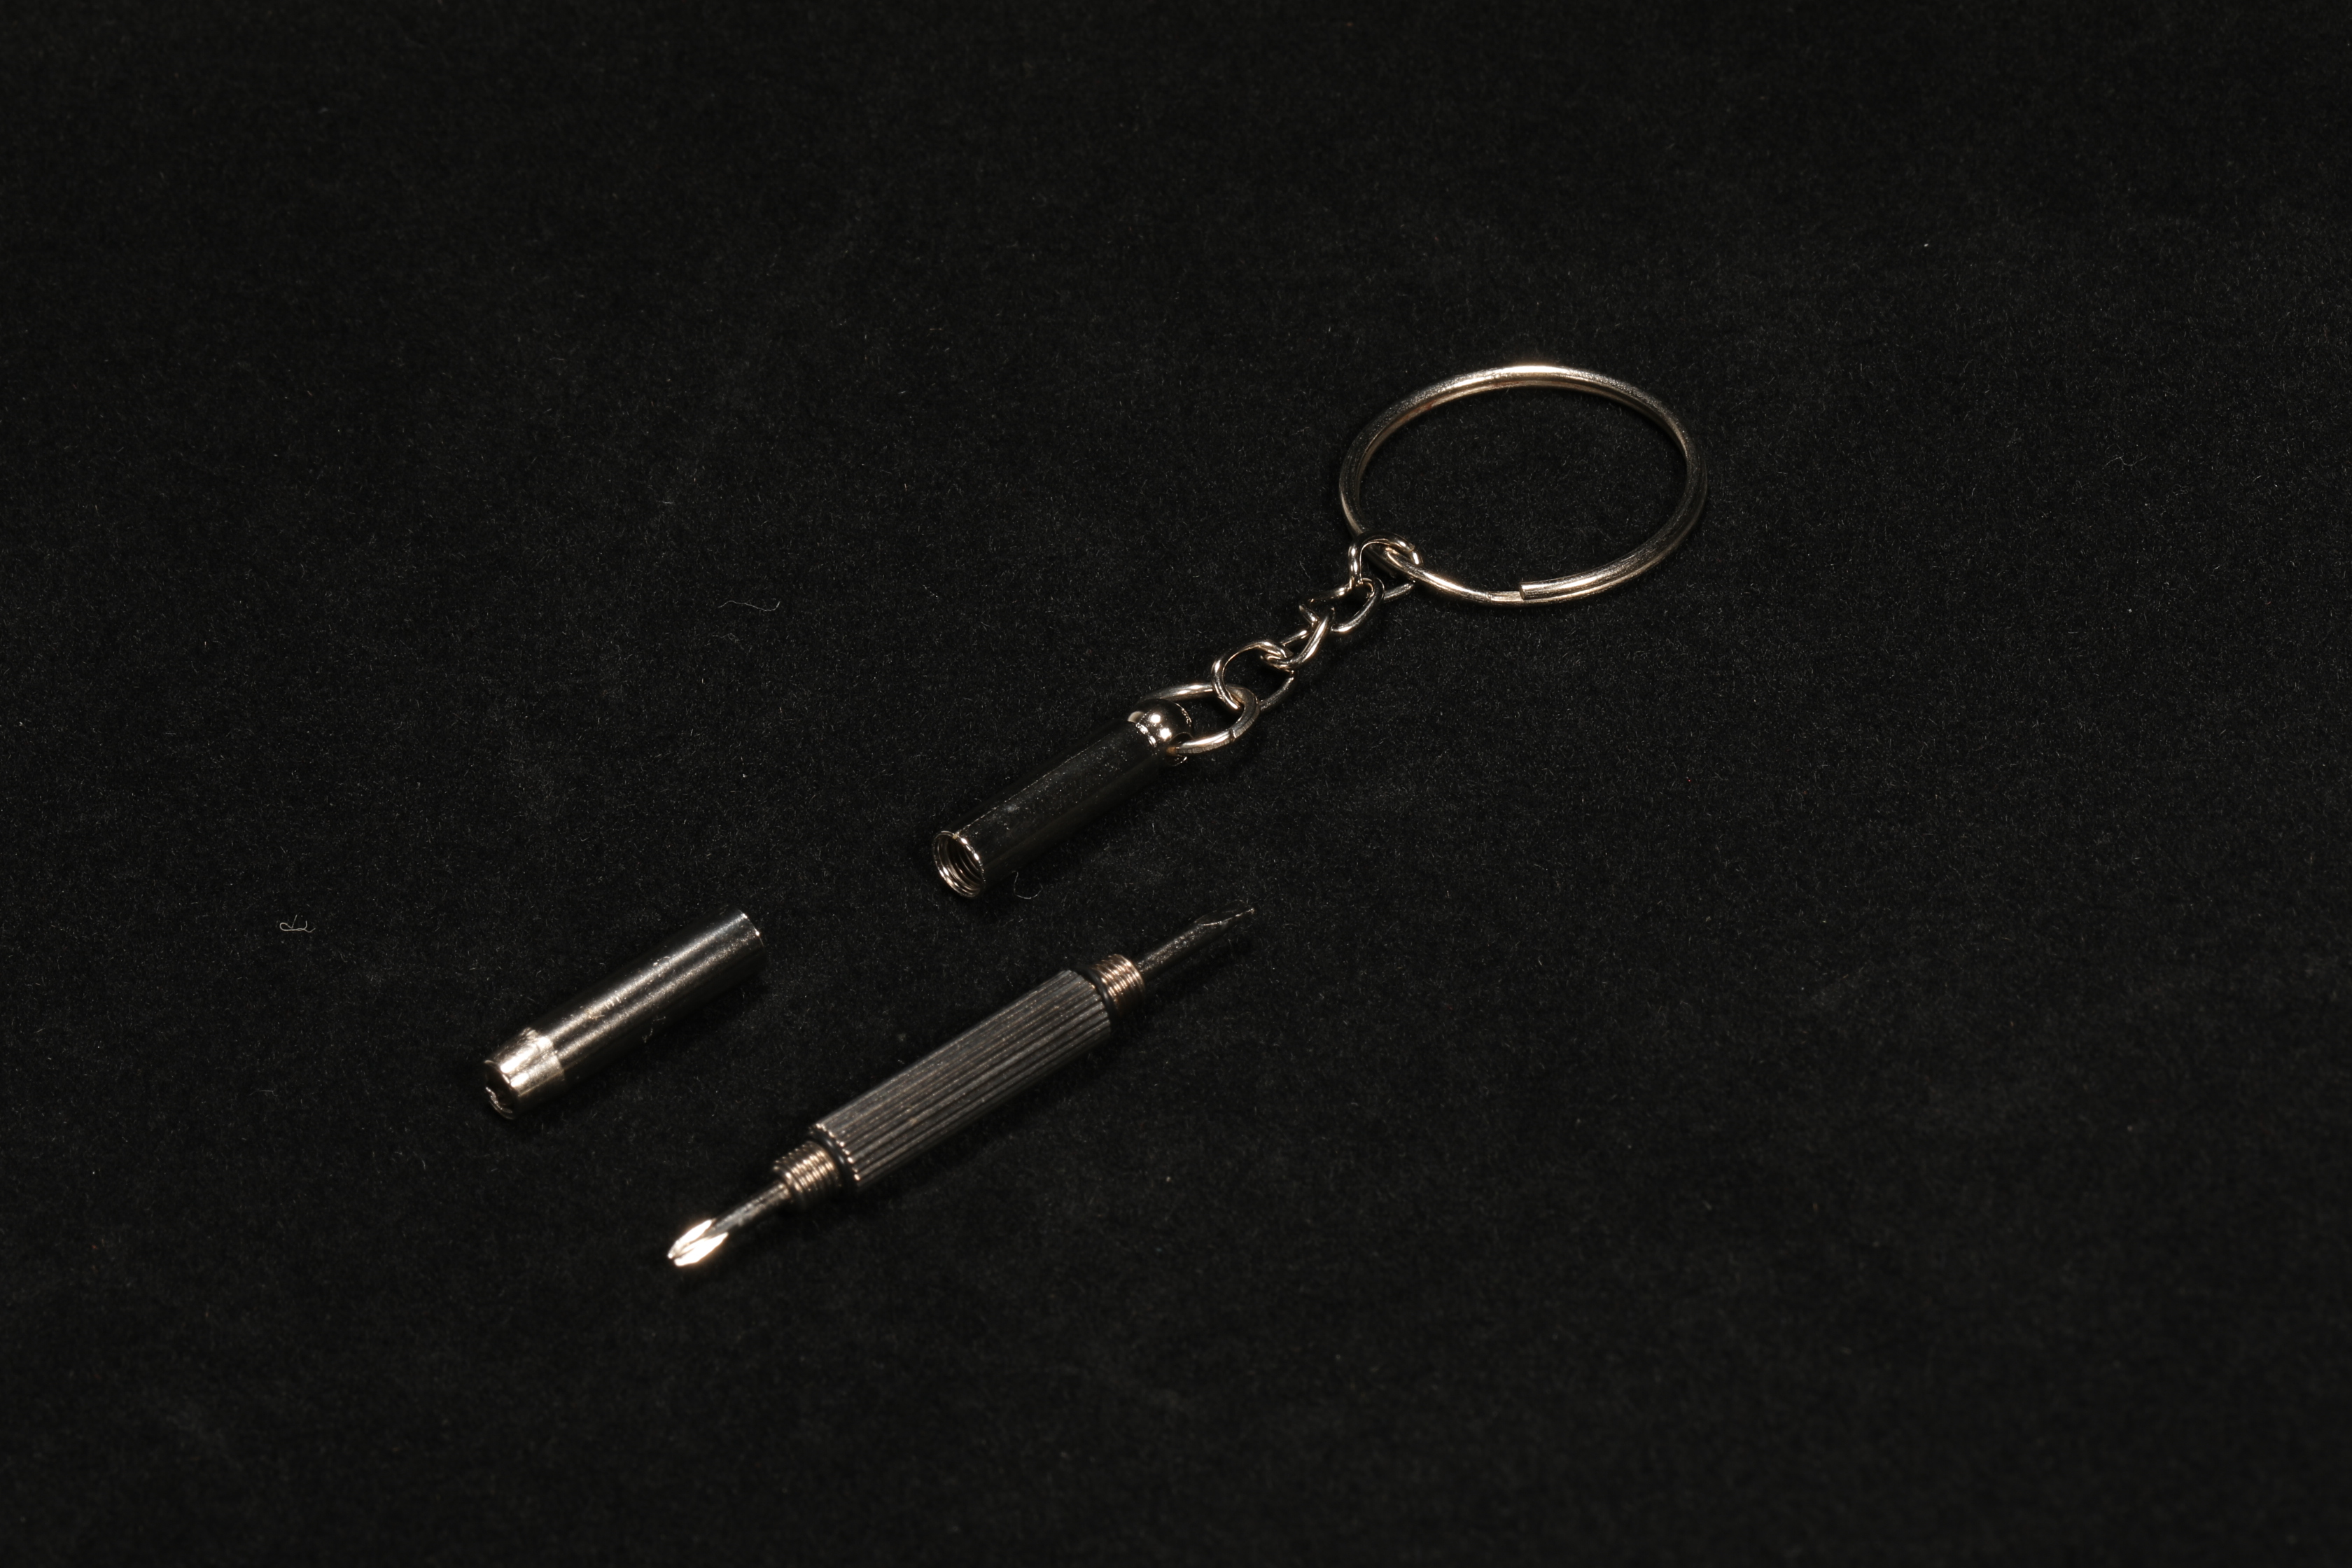 2021 Keyring and tool pen dual use